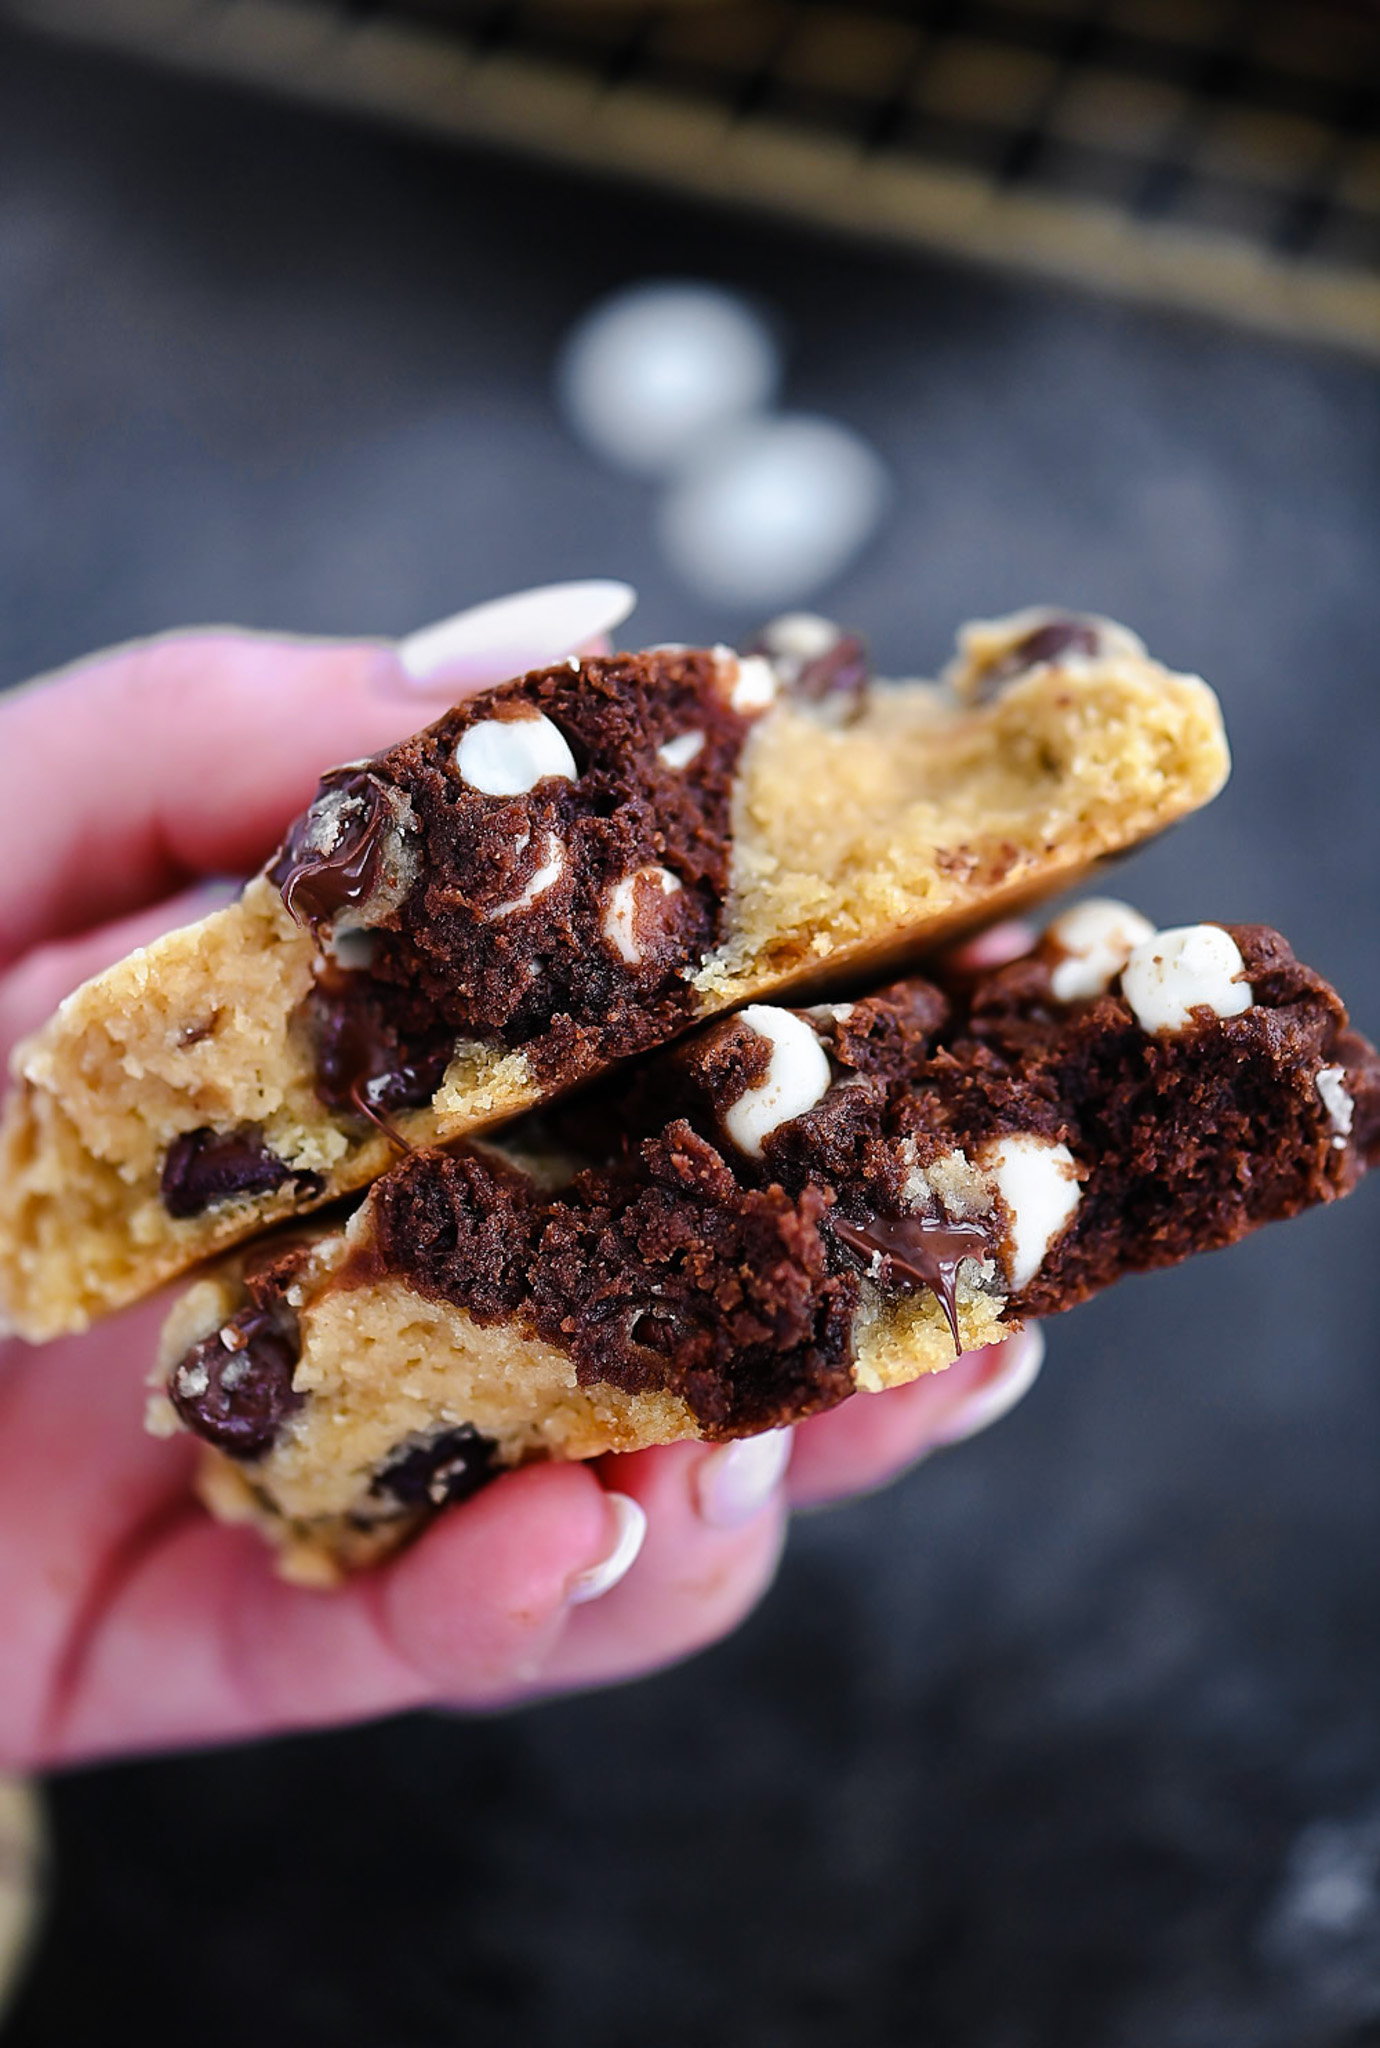 Brookies are a winning combo of chocolate chip cookies and brownies.